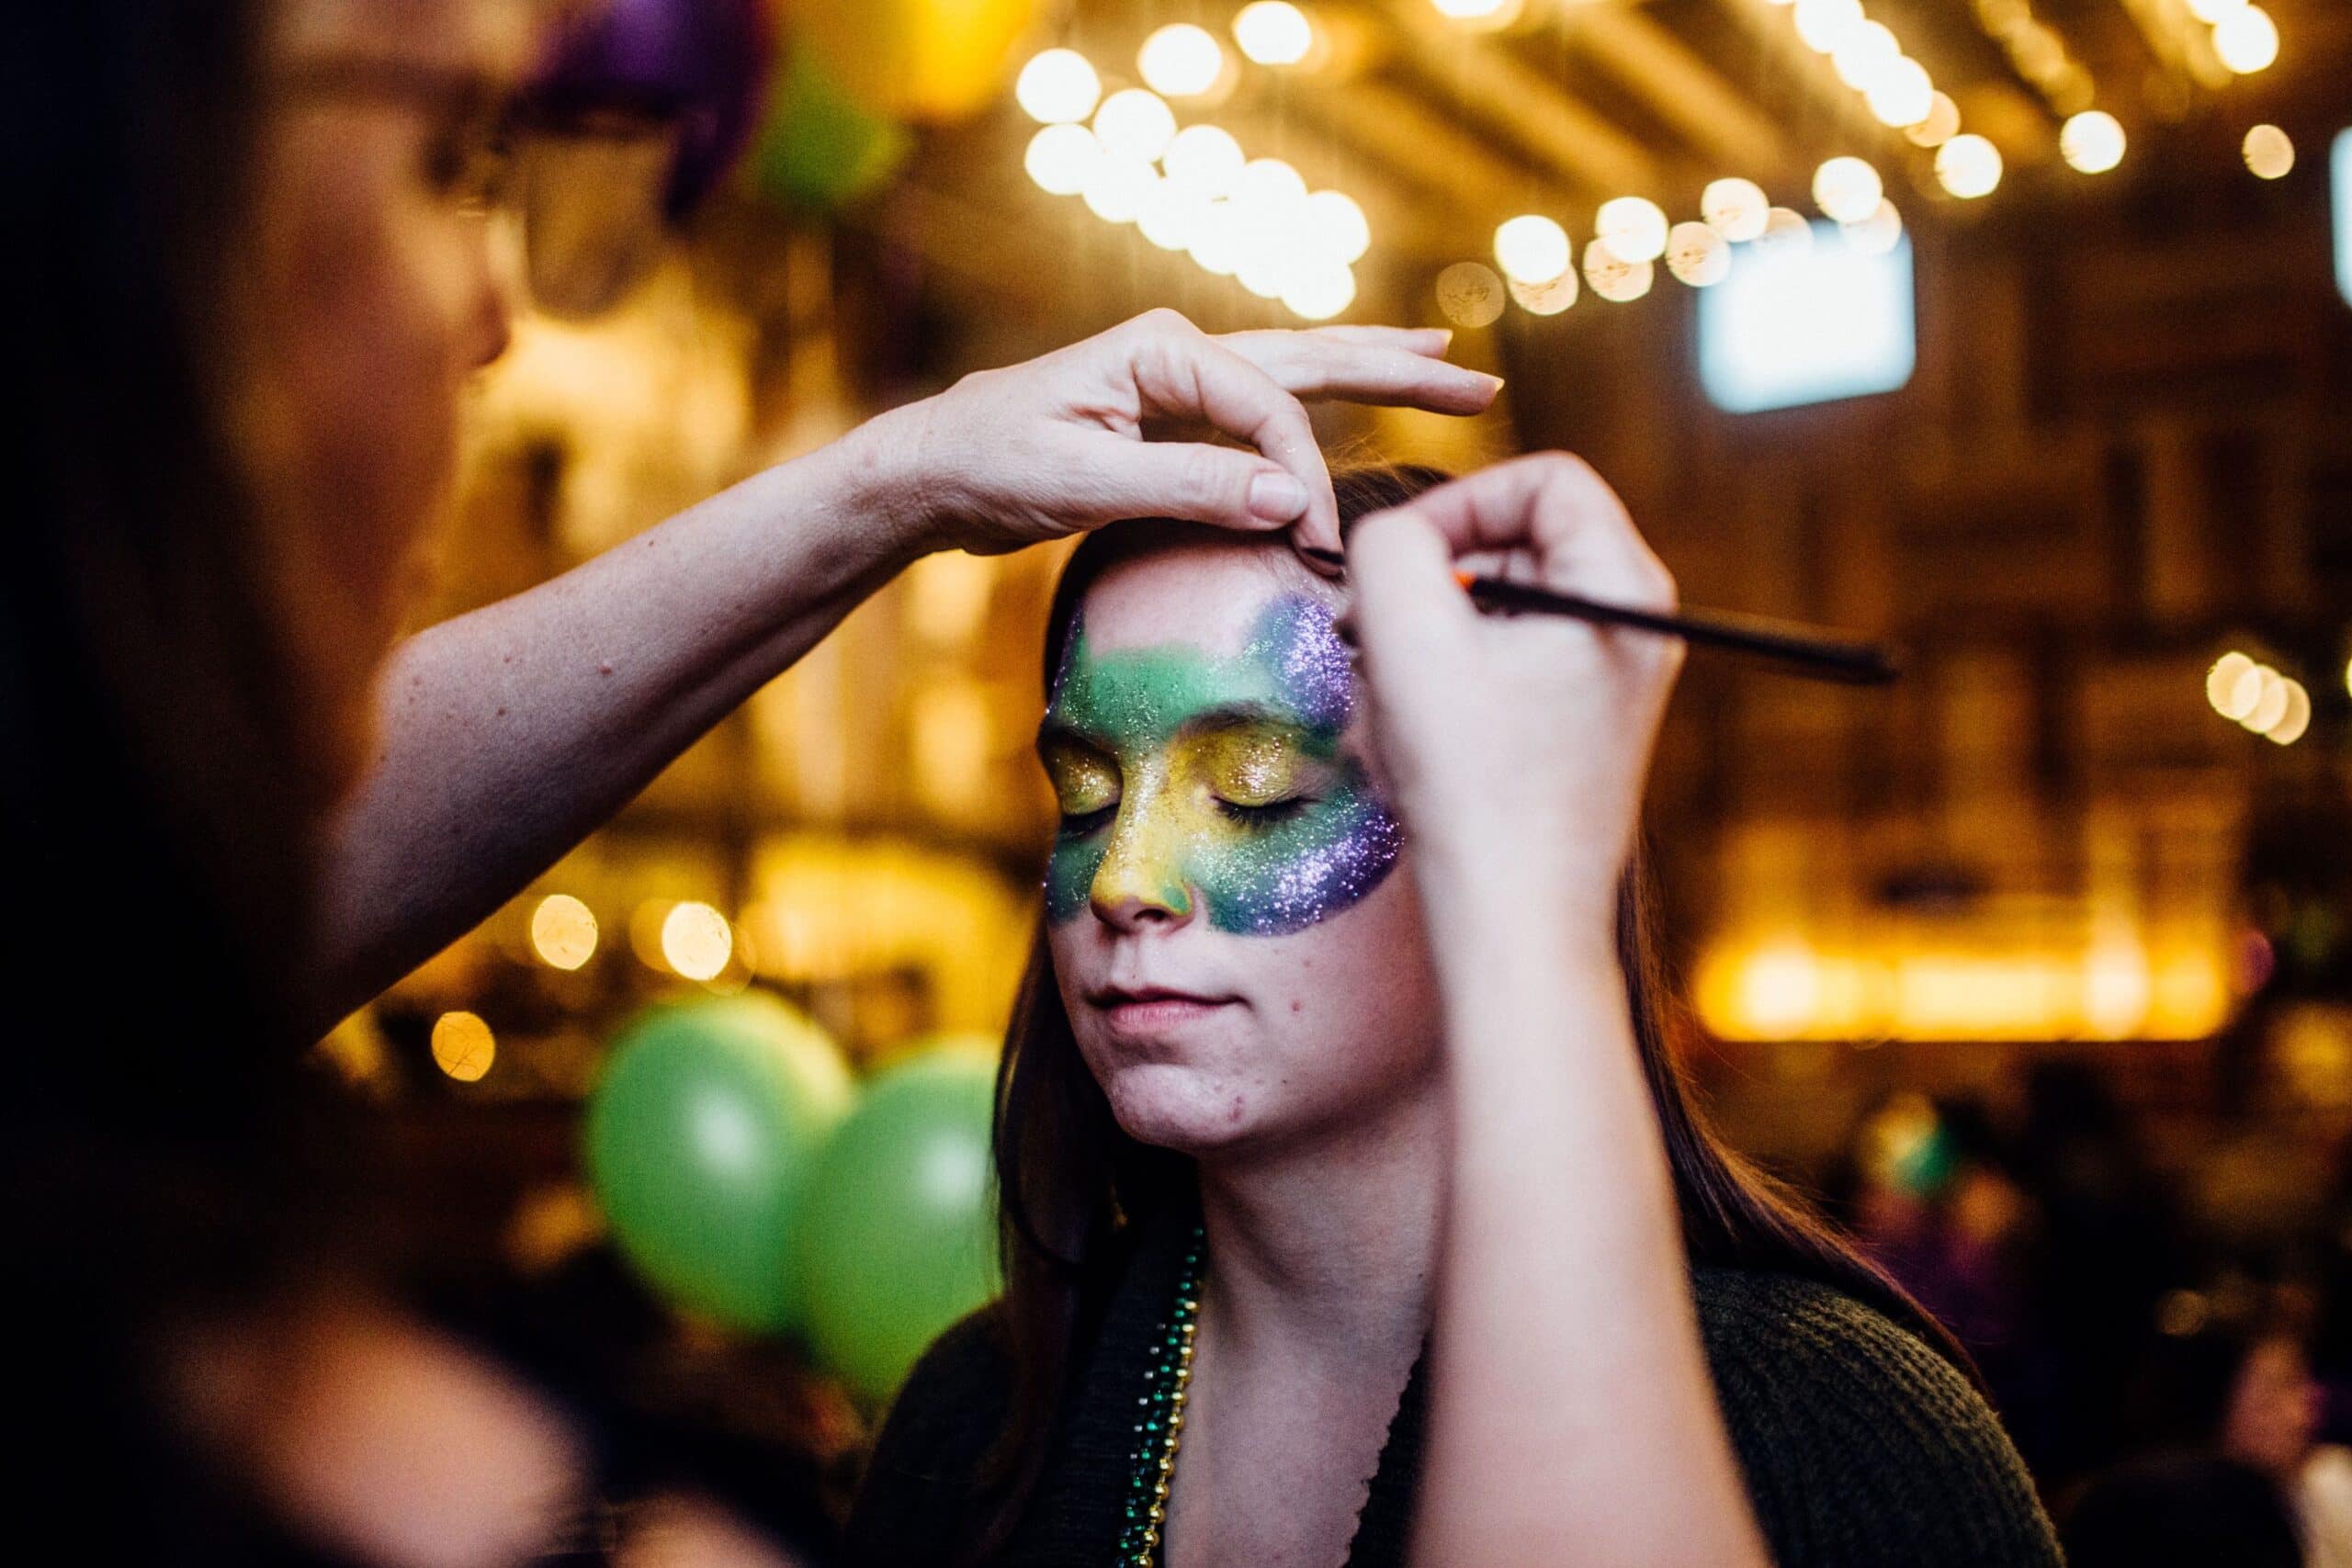 Mardi Gras face painters at The Rustic